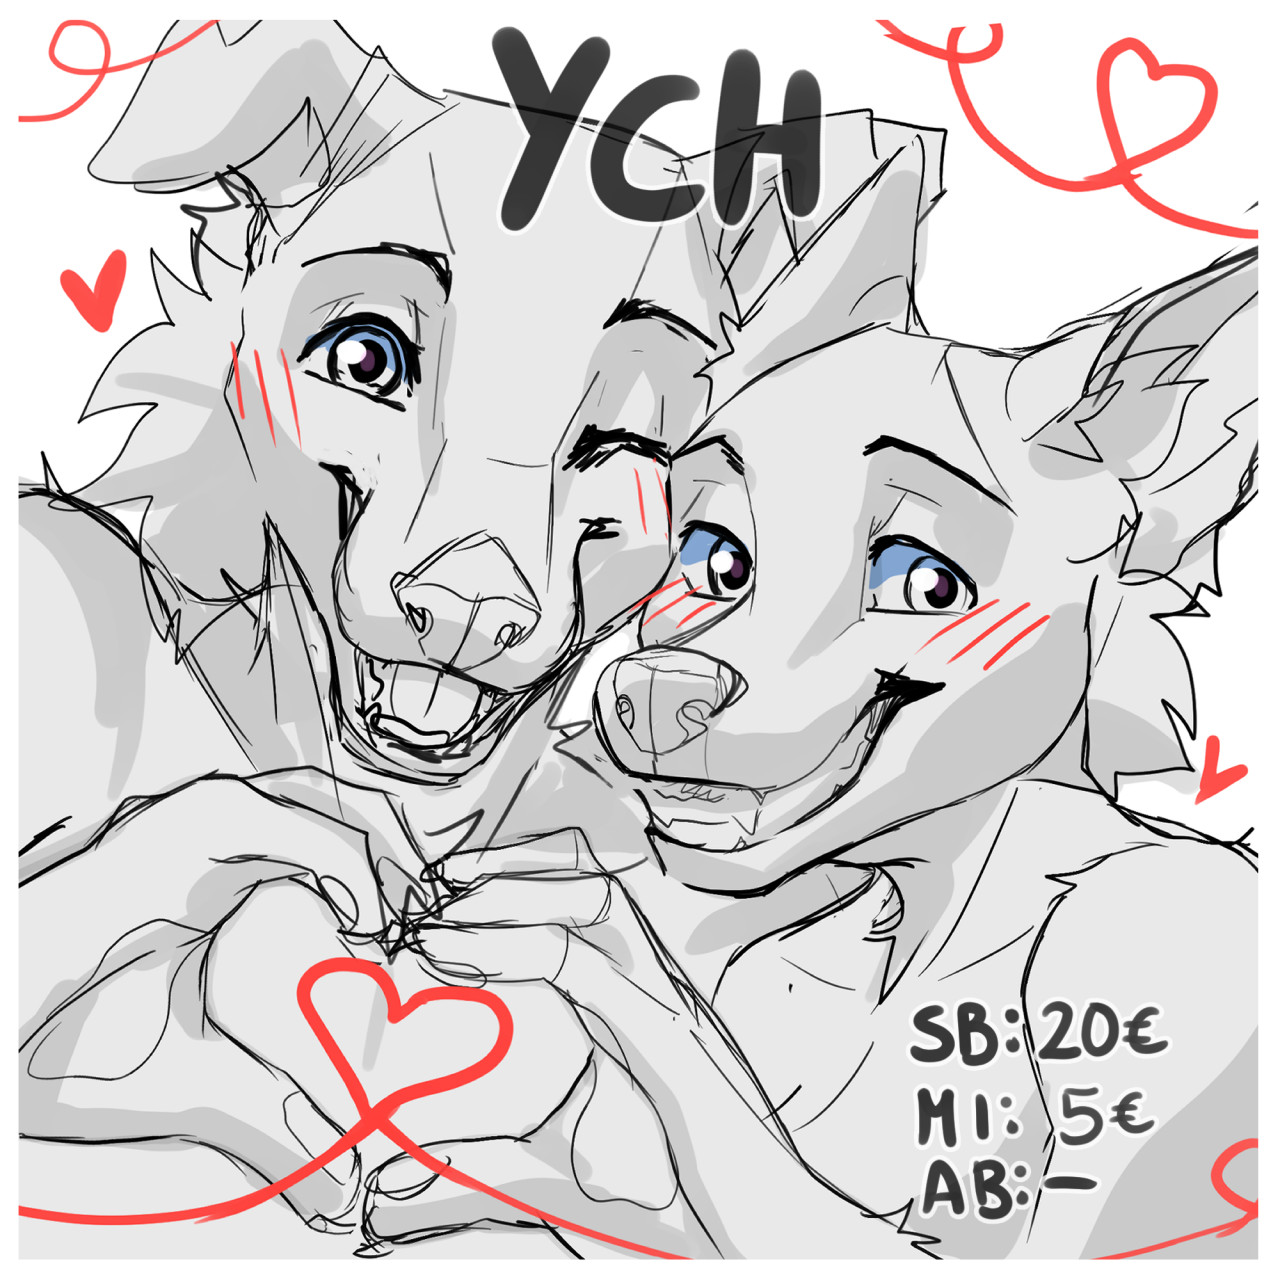 YCH - Romantic lovers [OPEN 5/12] SET PRICE 6$-20$ by Ciant-ADOPTS